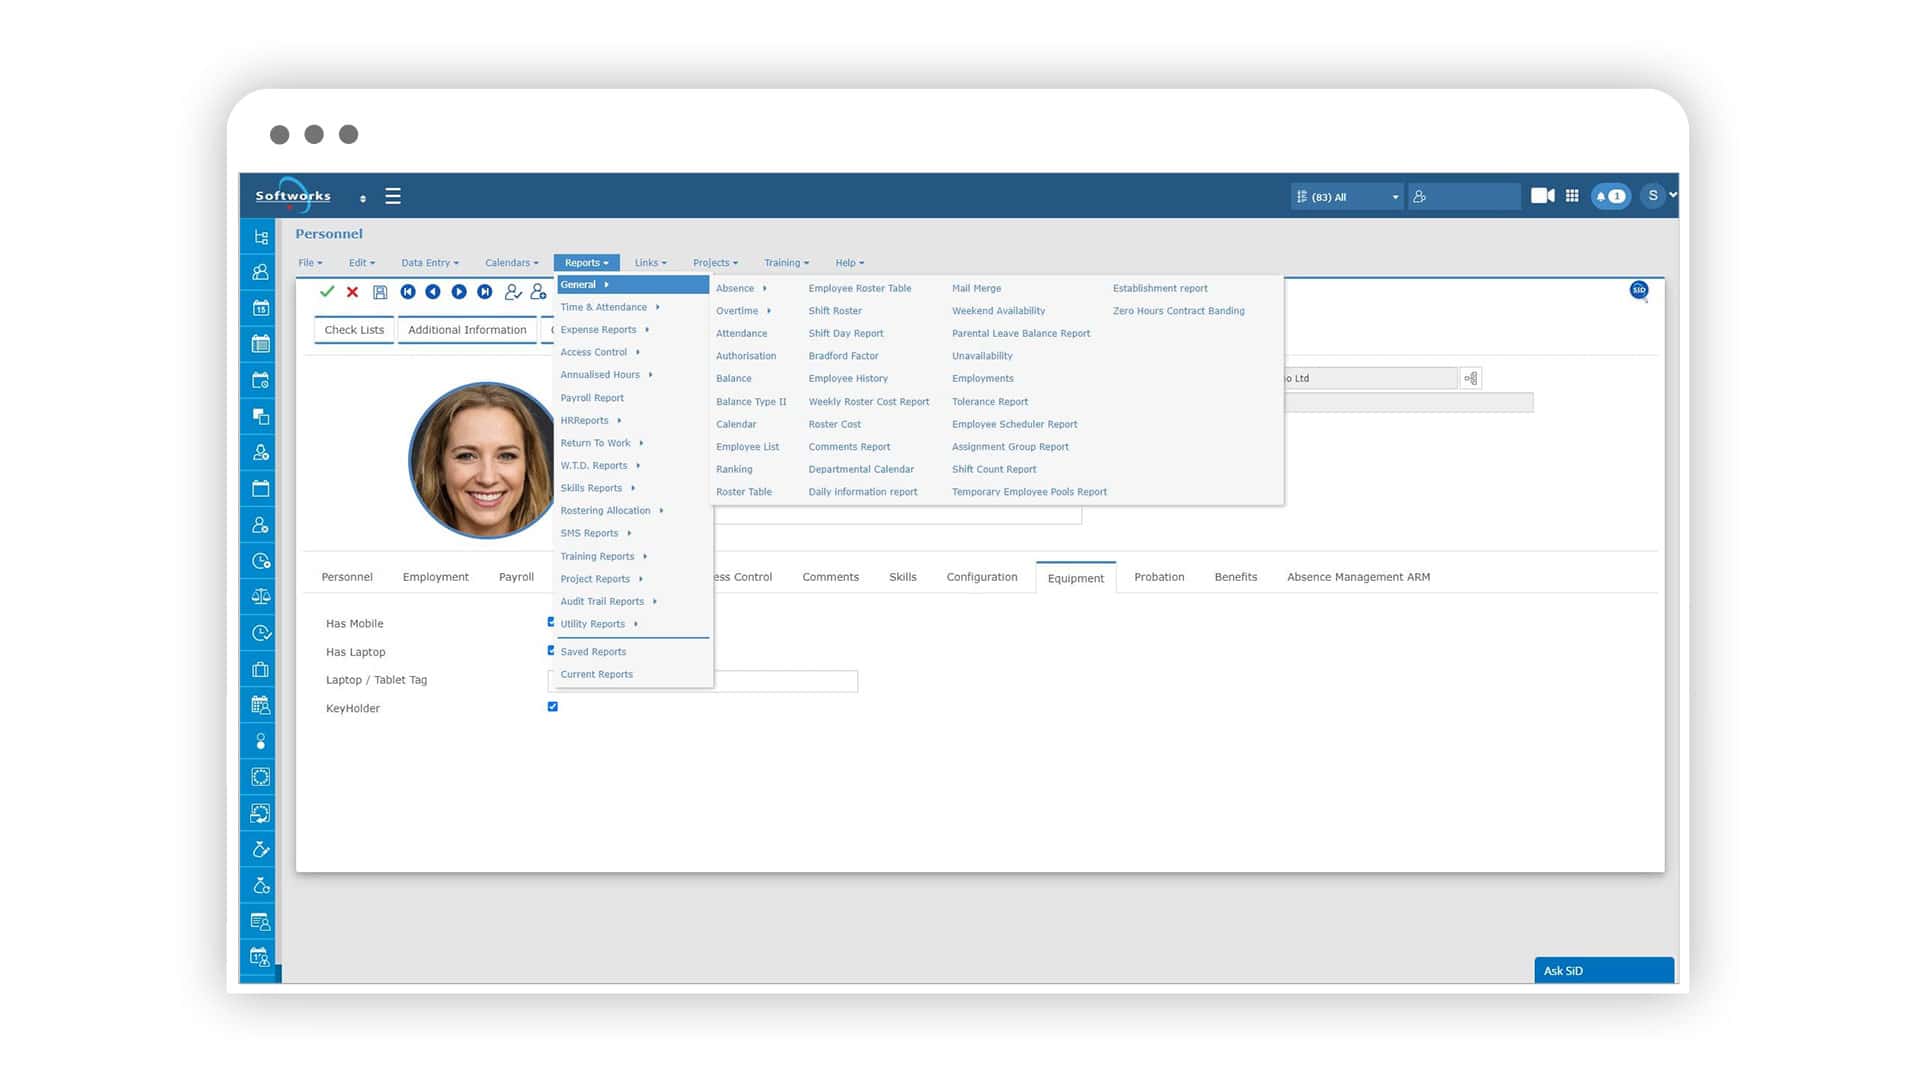 Softworks HR Management Software Personnel Reports screen.